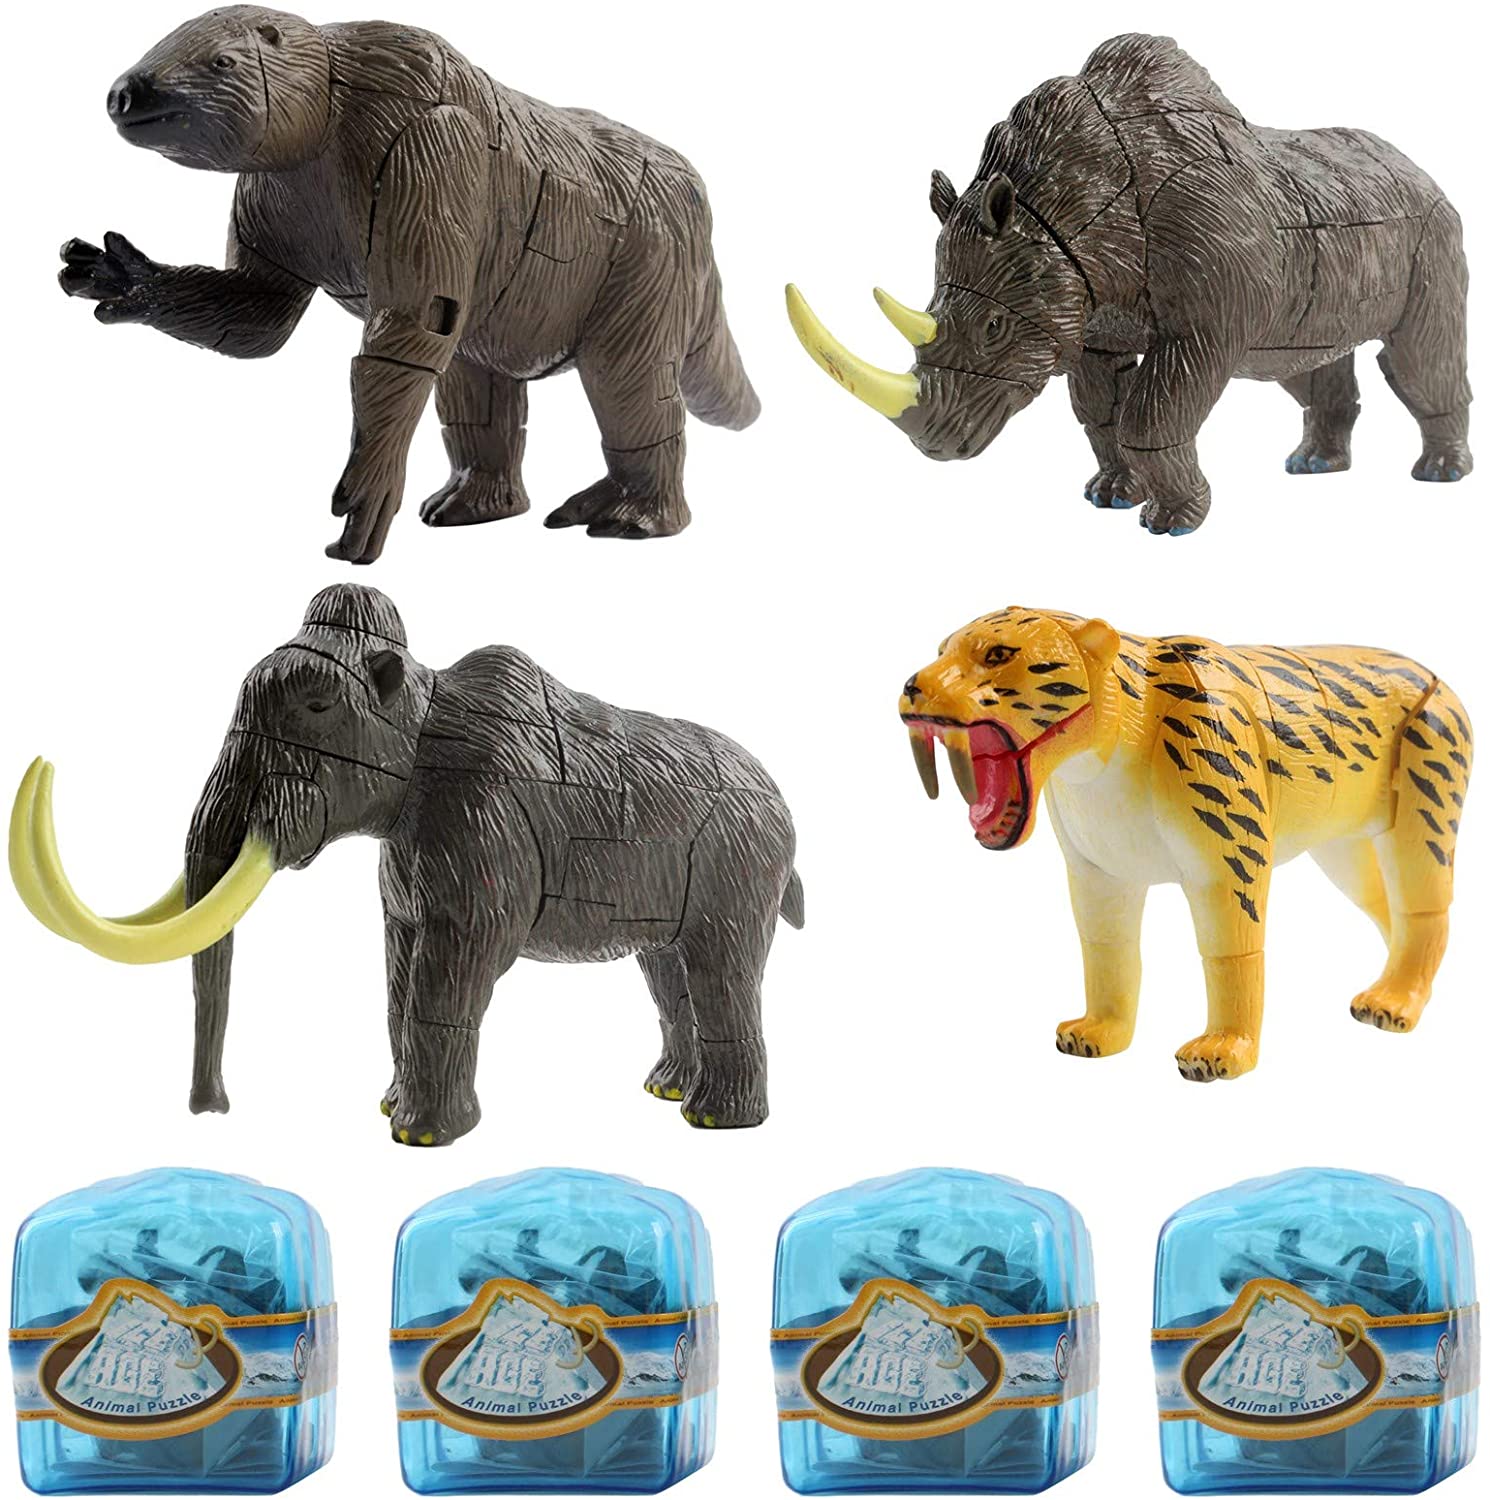 Prehistoric Set With 4 Ice Age Animals In Glacier Cubes Kids Archaeology 3D Puzzle Take Apart Discover Fossils Science STEM Educational Dig Up Easter Egg Party Toy Great Gift For Boys And Girls